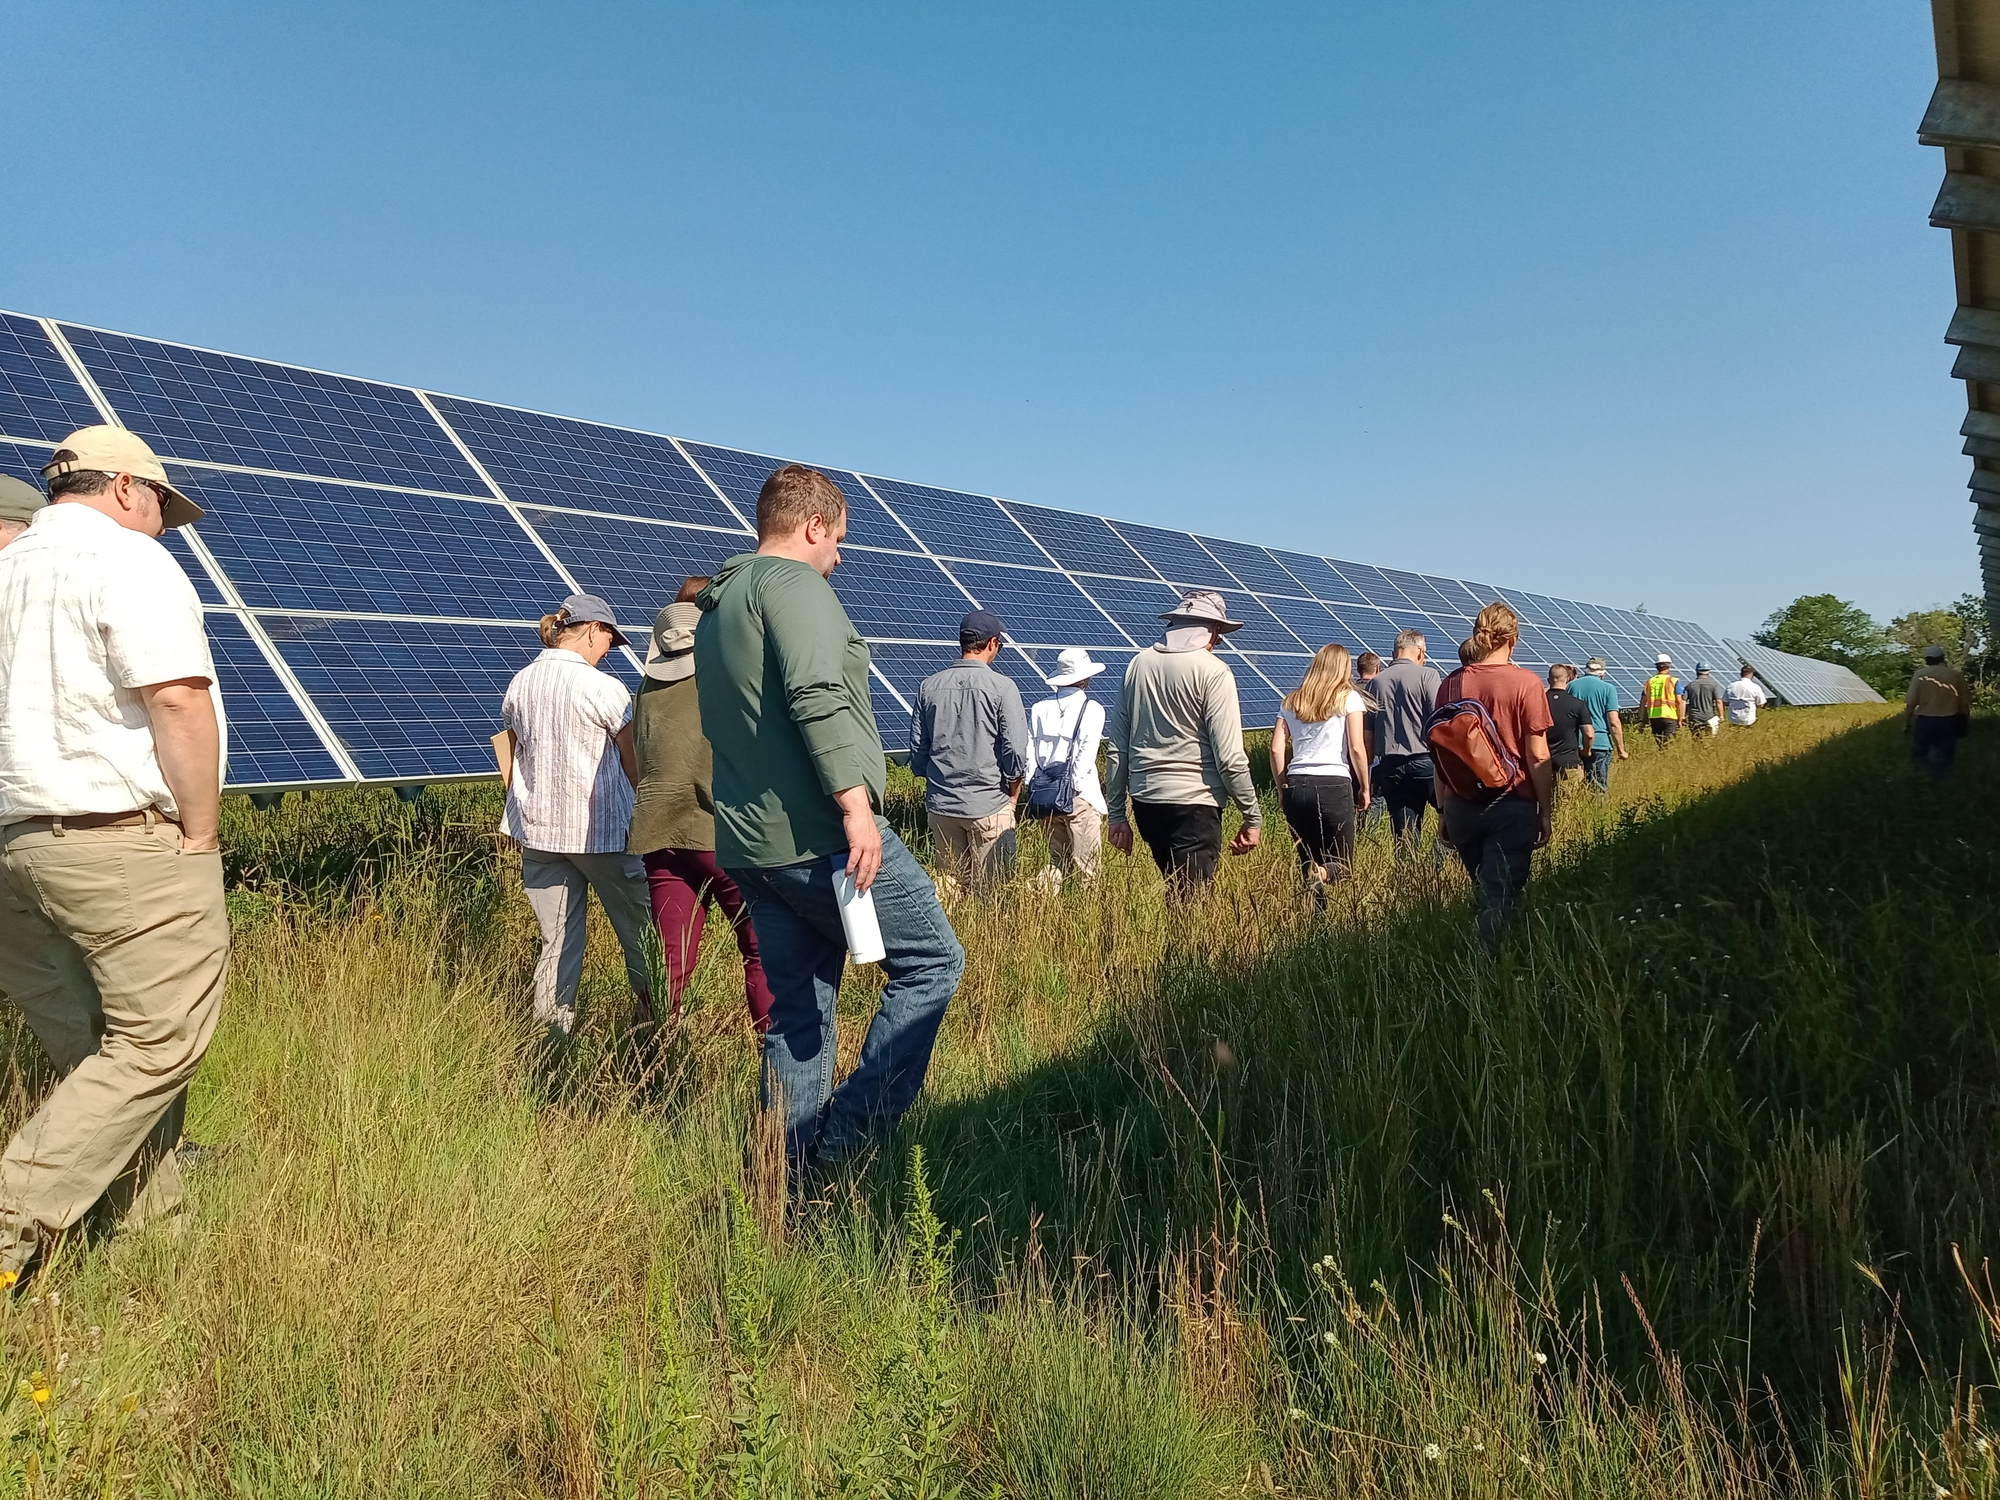 Follow the Sun tour highlights practices that combine agriculture with solar